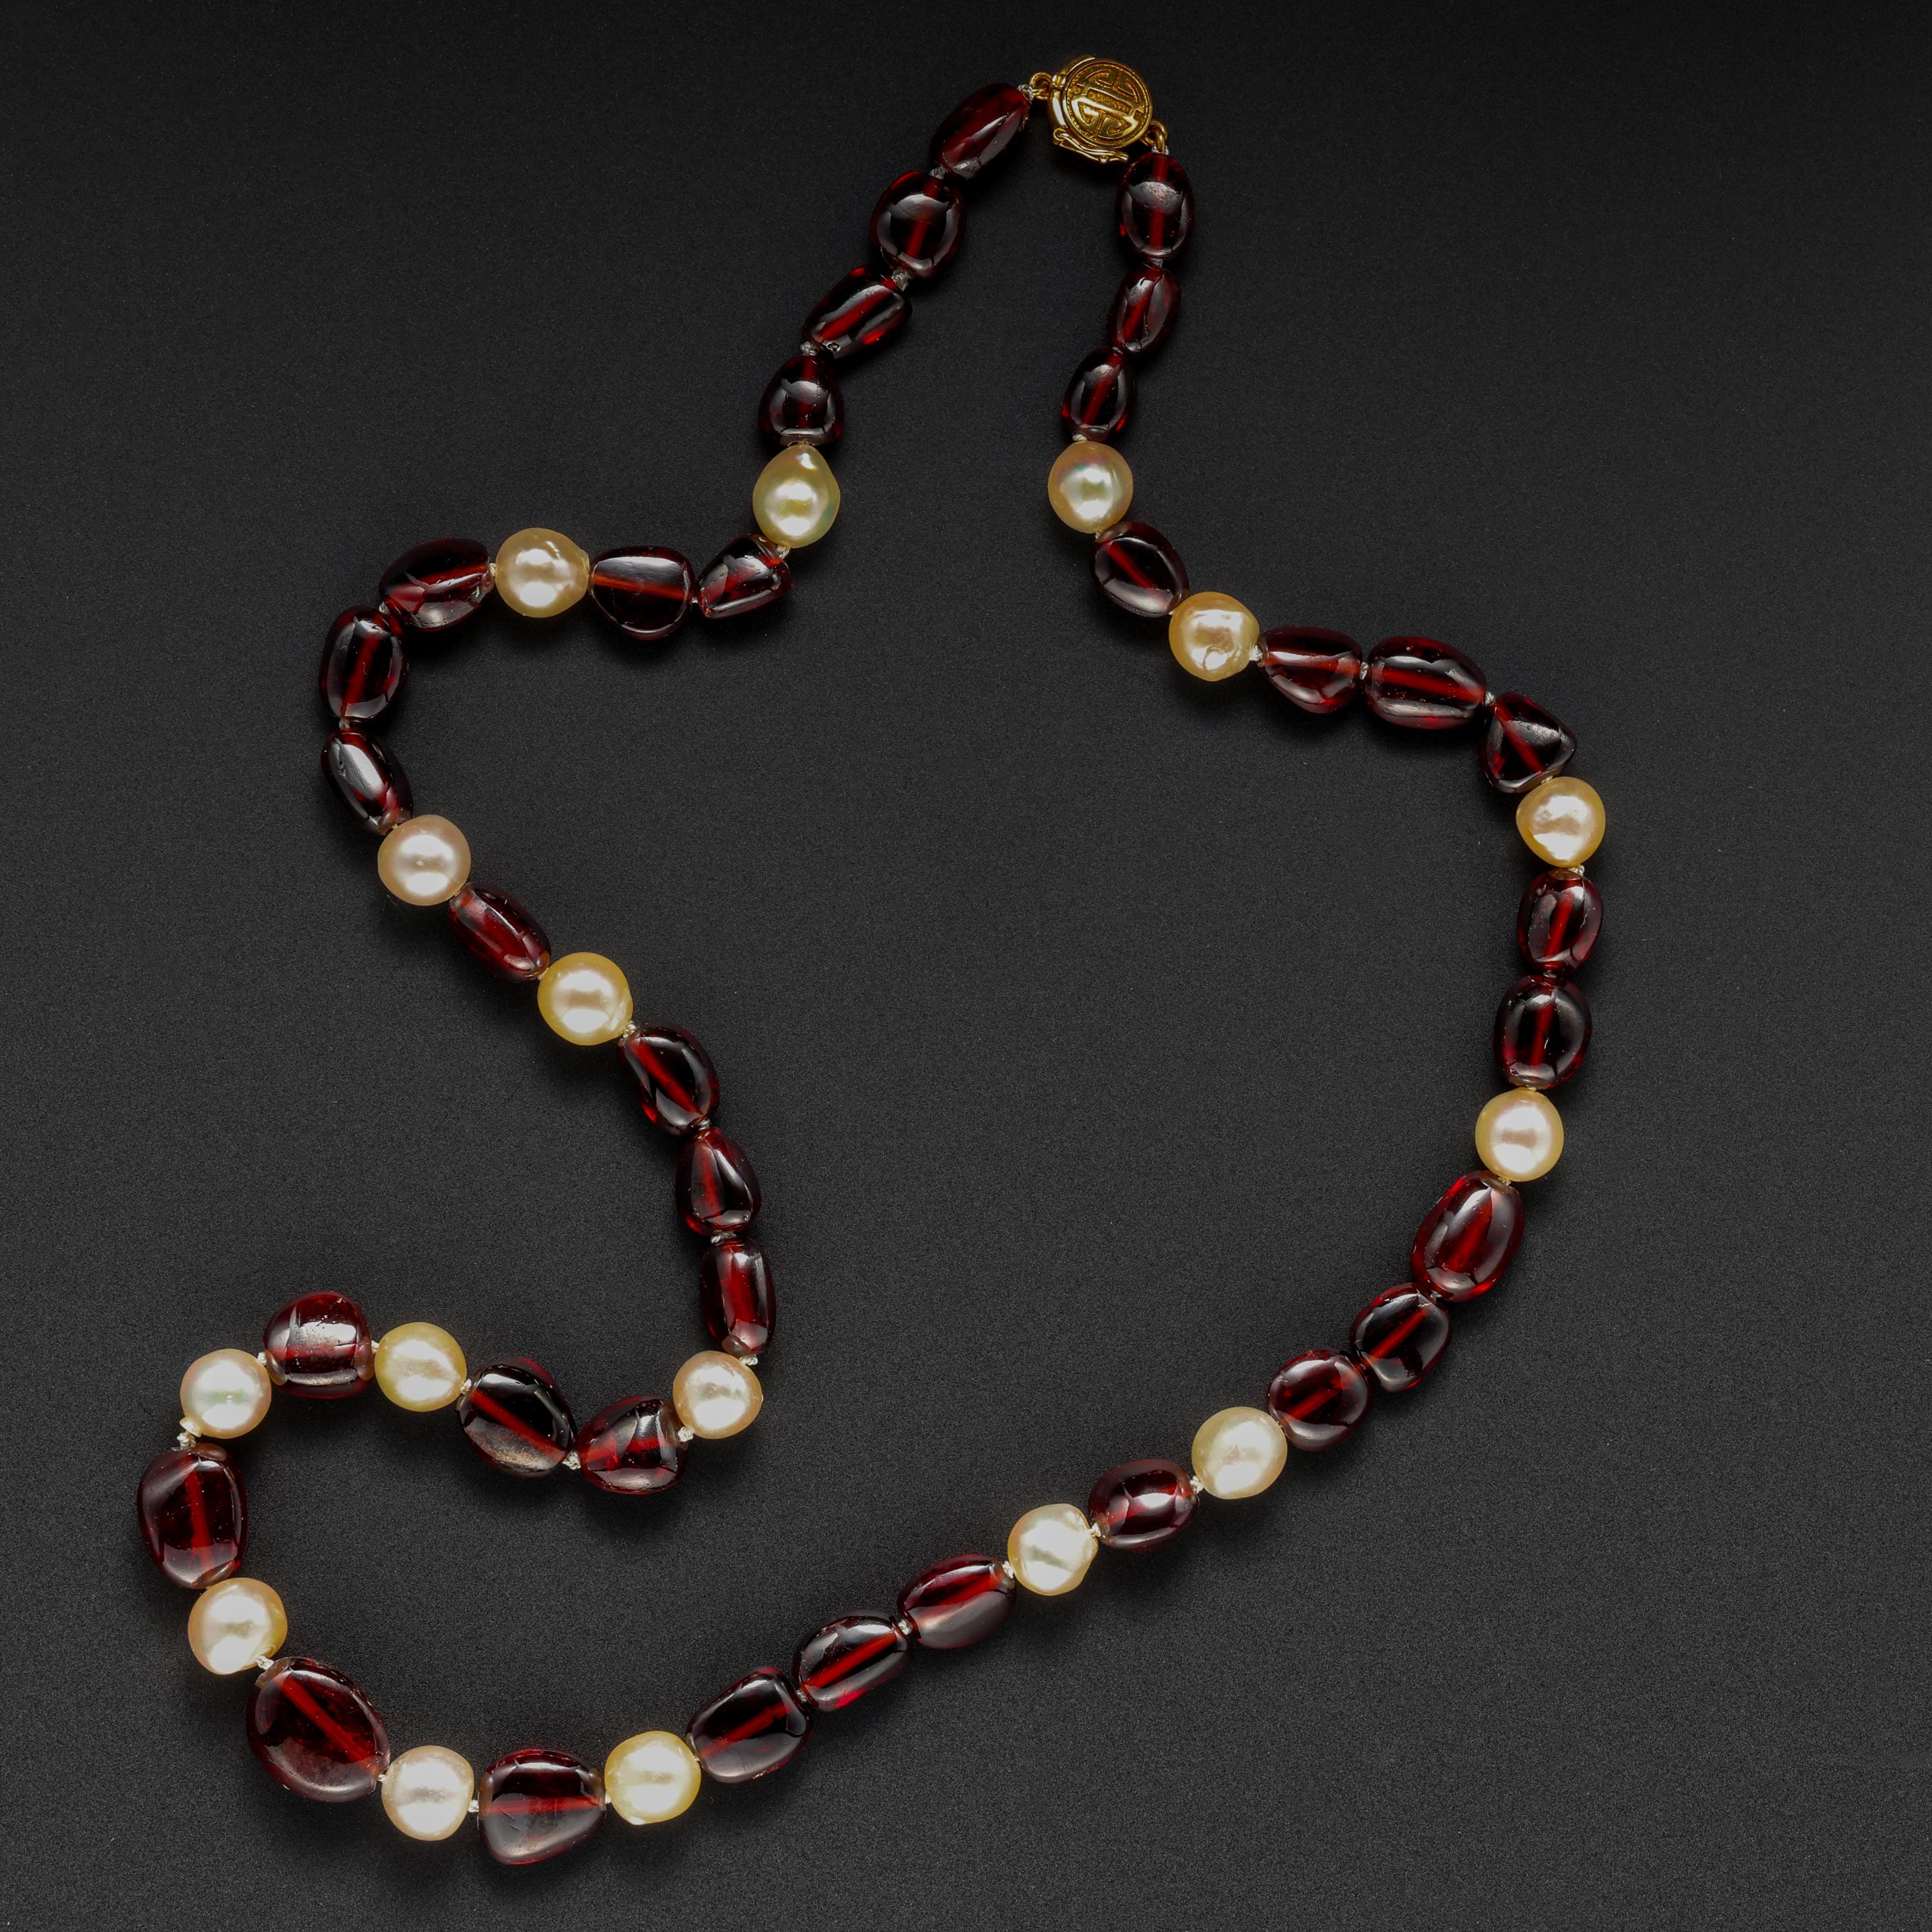 This vintage pearl and garnet necklace by Gump's of San Francisco features tumbled and polished garnet beads the color of  Cabernet Sauvignon, interspersed with luminous, lustrous cultured freshwater pearls, almost certainly from Japanese waters.